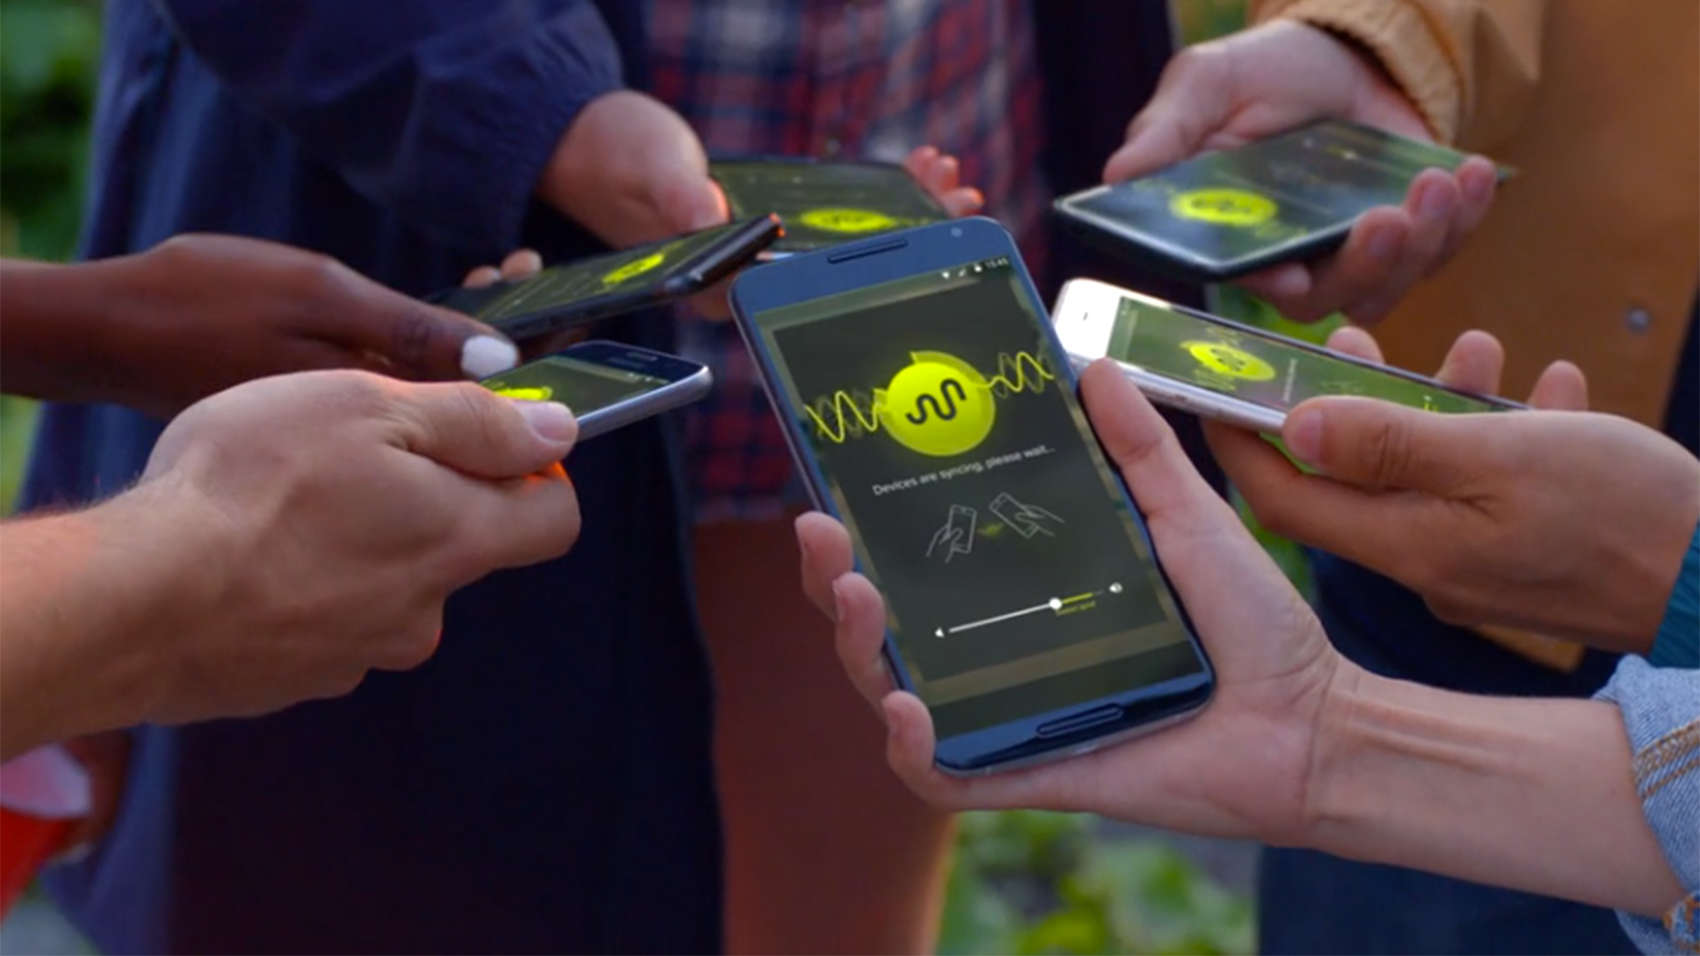 No stereo? No problem. AmpMe app creates a sound system with all the phones at a party.